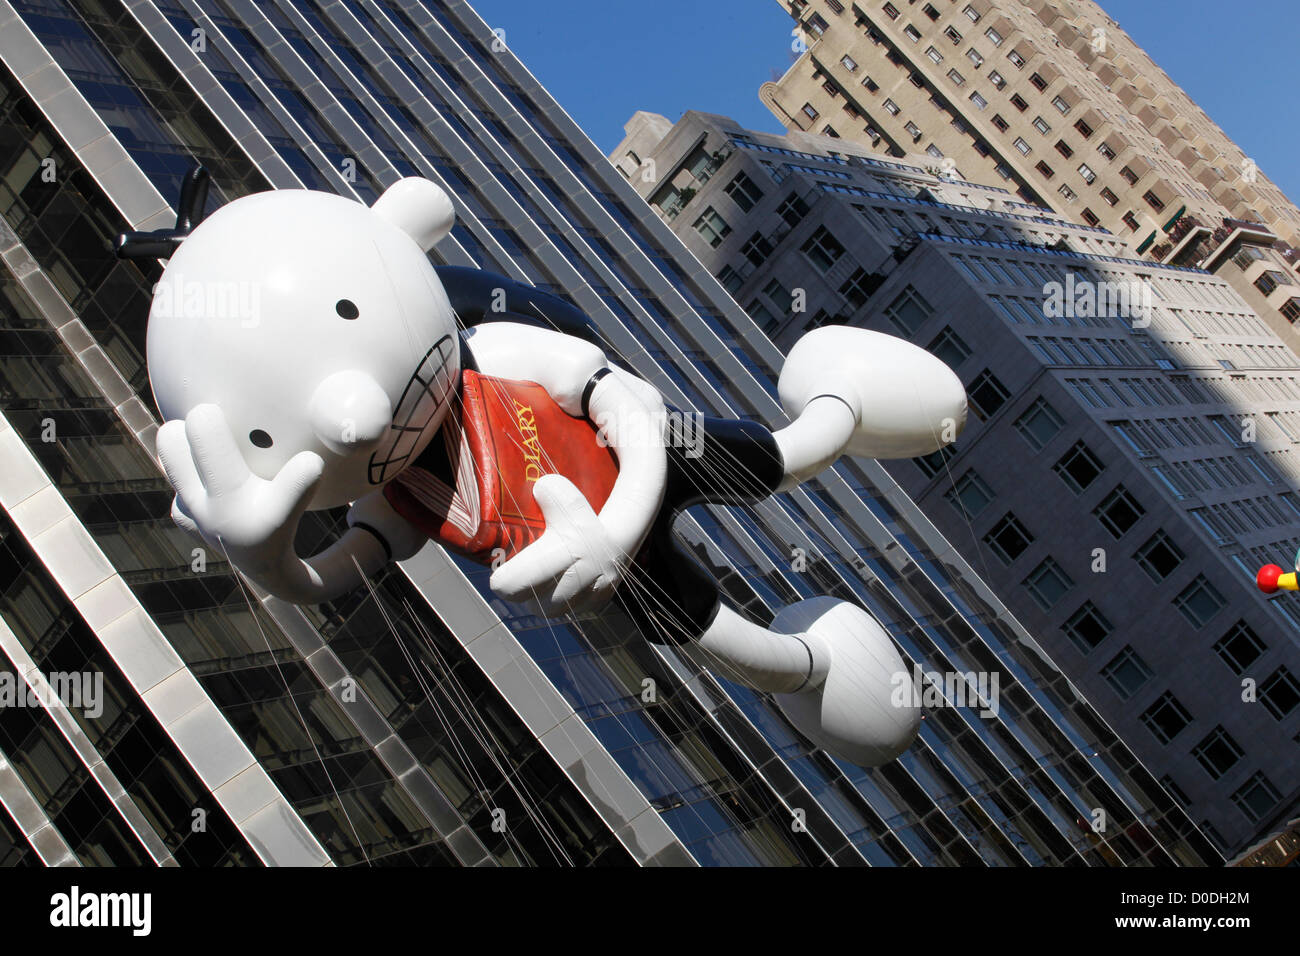 Diary of a Wimpy Kid balloon moves down Central Park West during Macy's Thanksgiving Day Parade in New York City, on Thursday, Nov. 22, 2012. Stock Photo